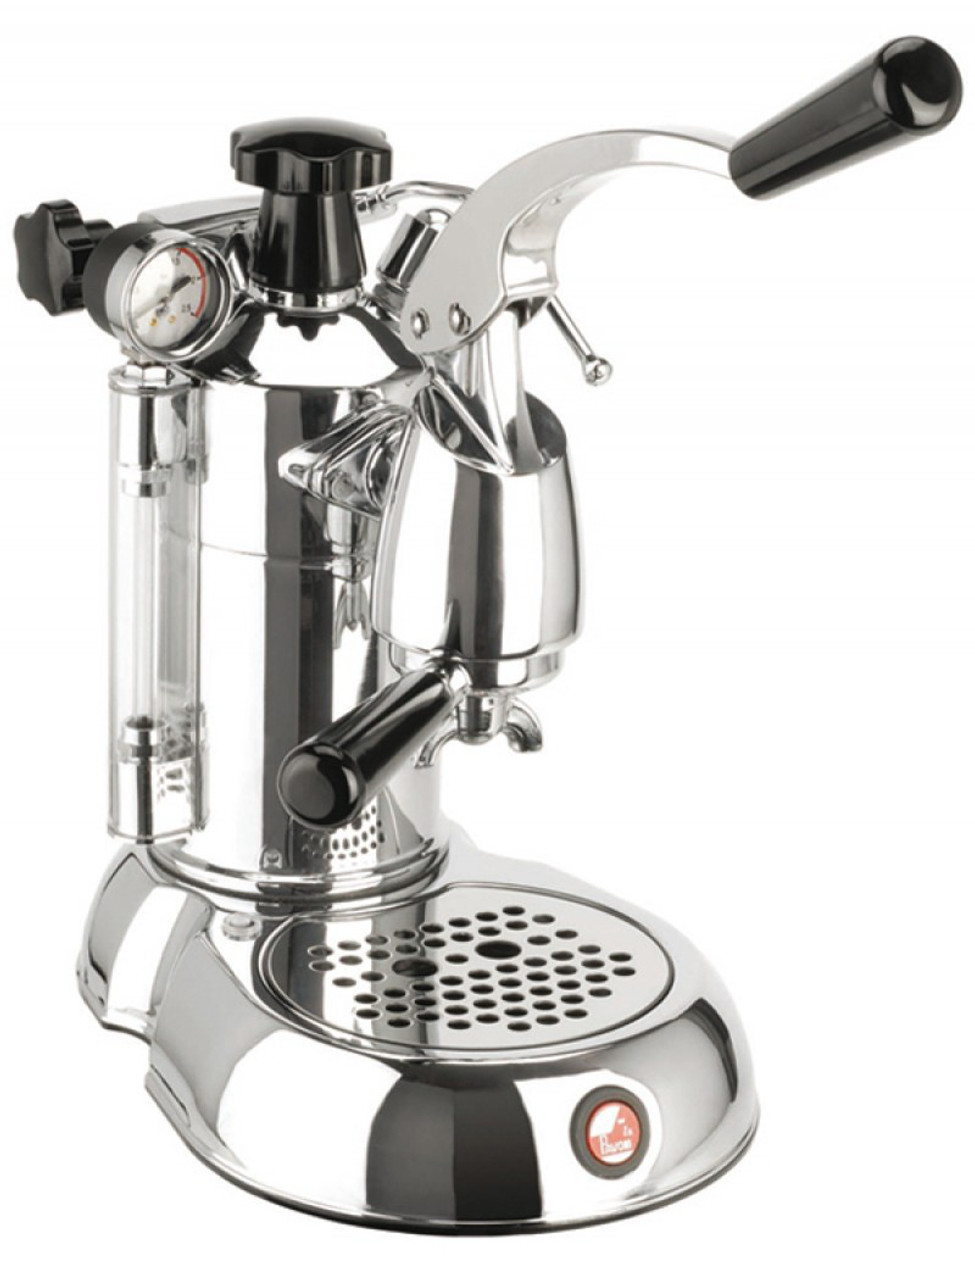 VIDEO: How to Use a Manual or Lever Espresso Machine - Perfect